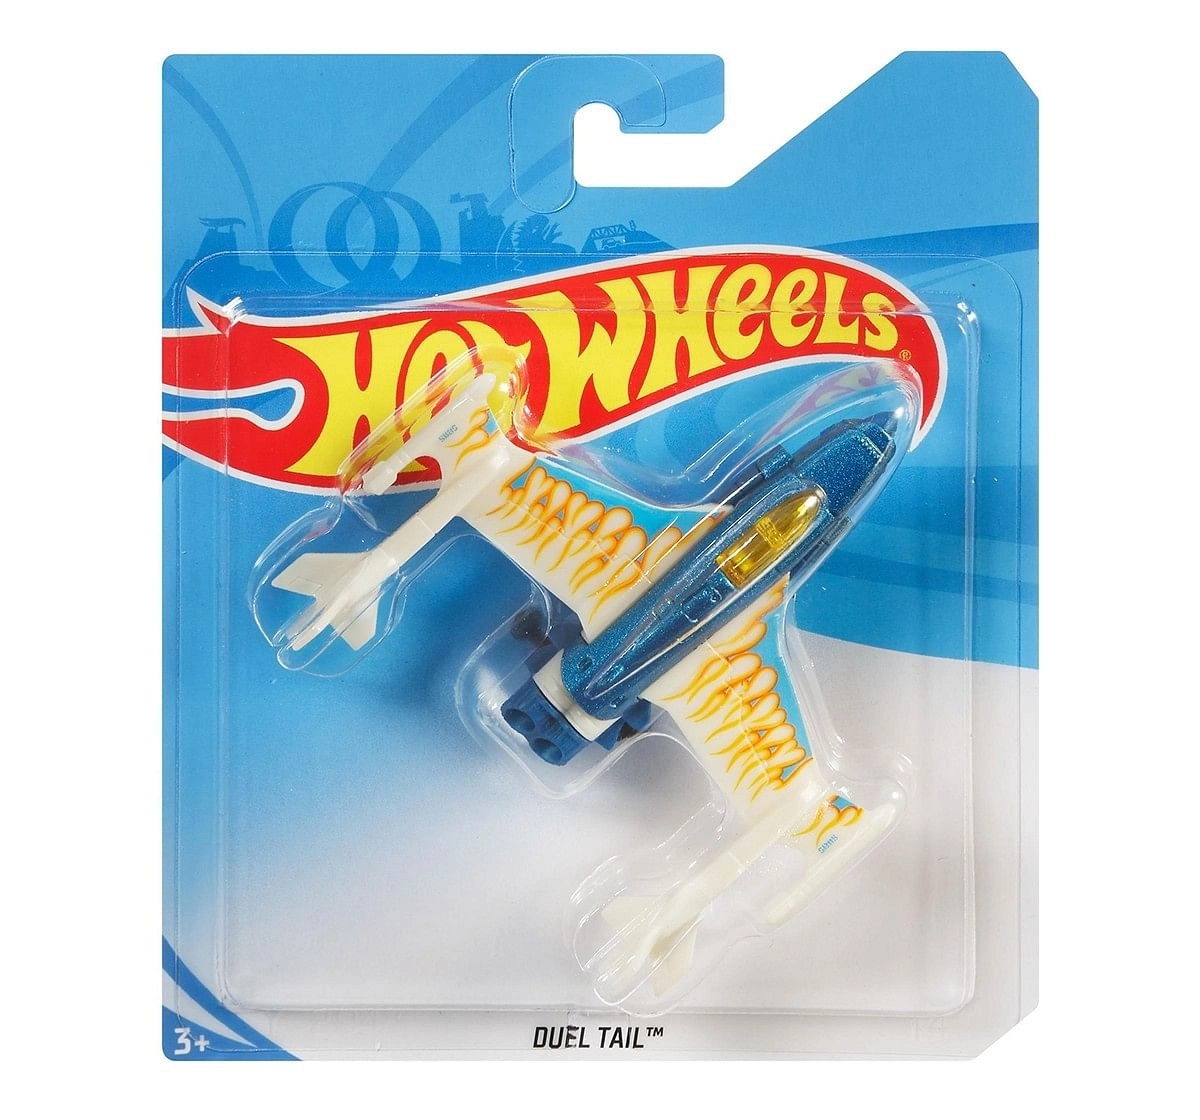 Hot Wheels Sky Buster Vehicles for Boys age 3Y+, Assorted